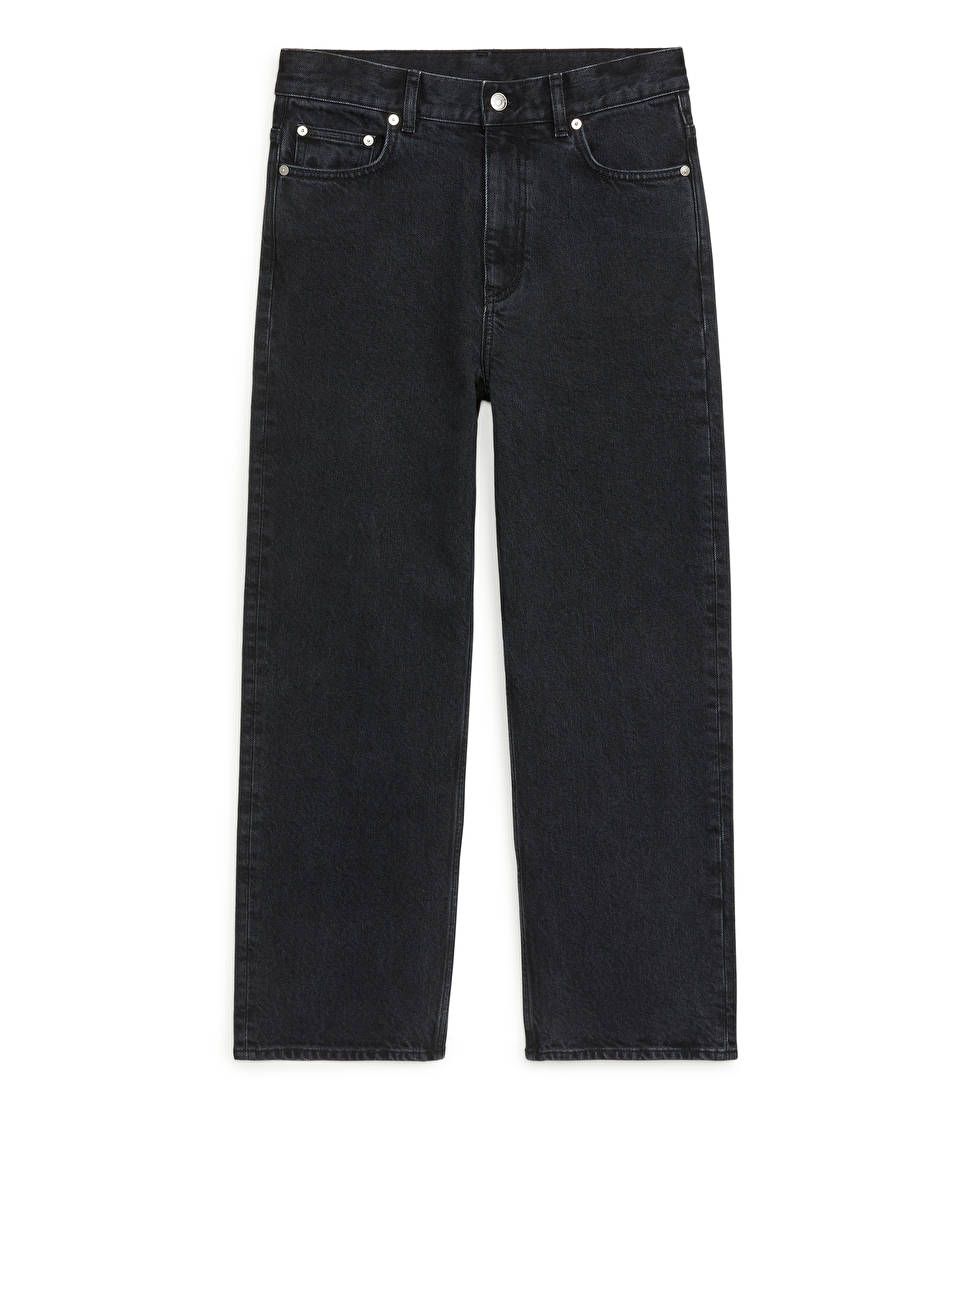 STRAIGHT CROPPED STRETCH Jeans | ARKET (US&UK)